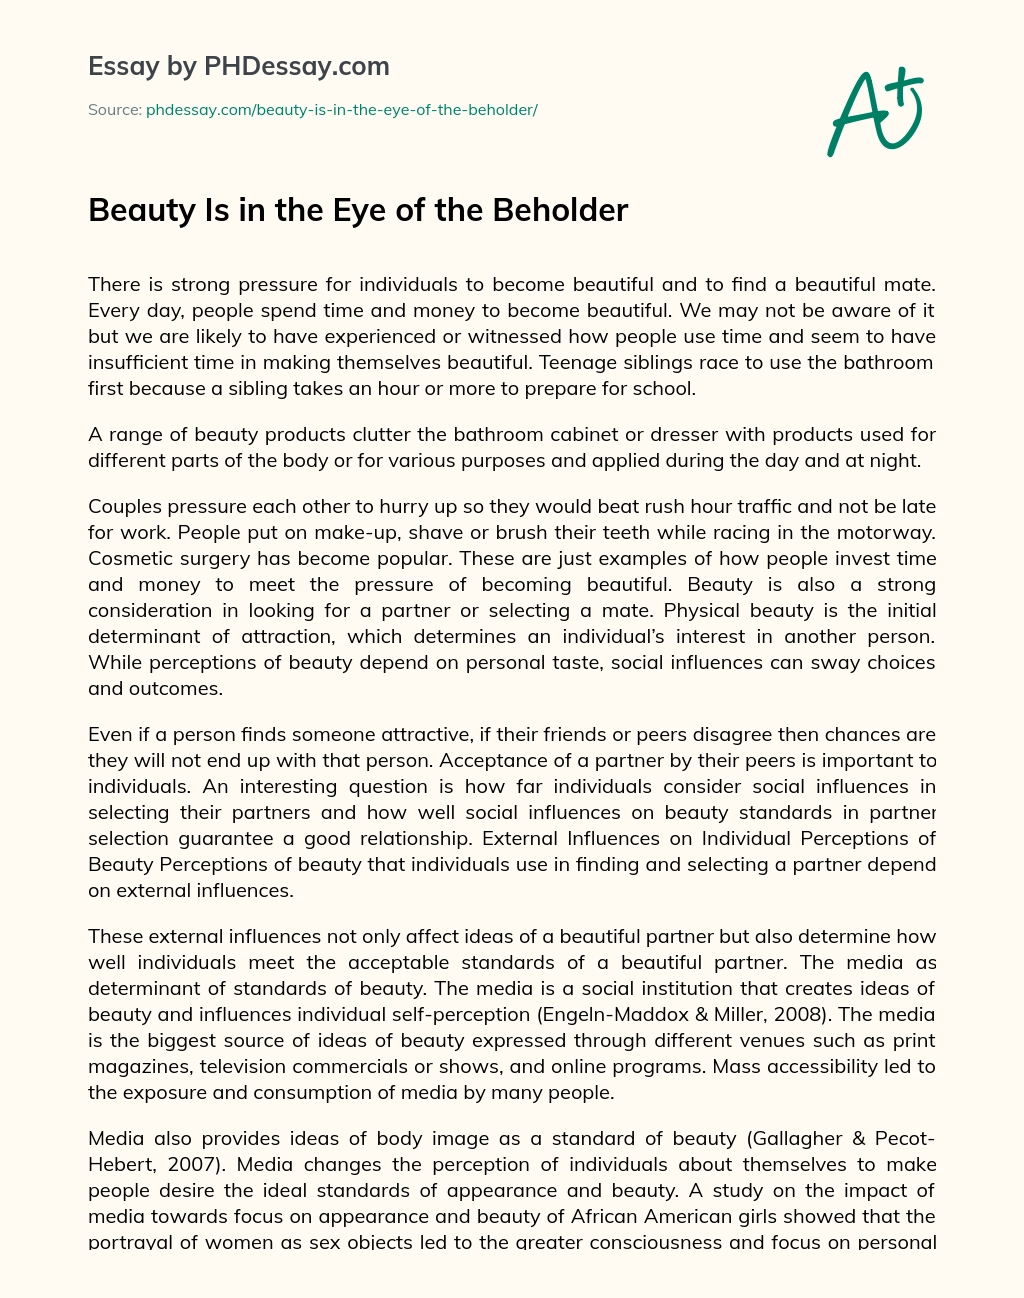 Beauty Is in the Eye of the Beholder essay